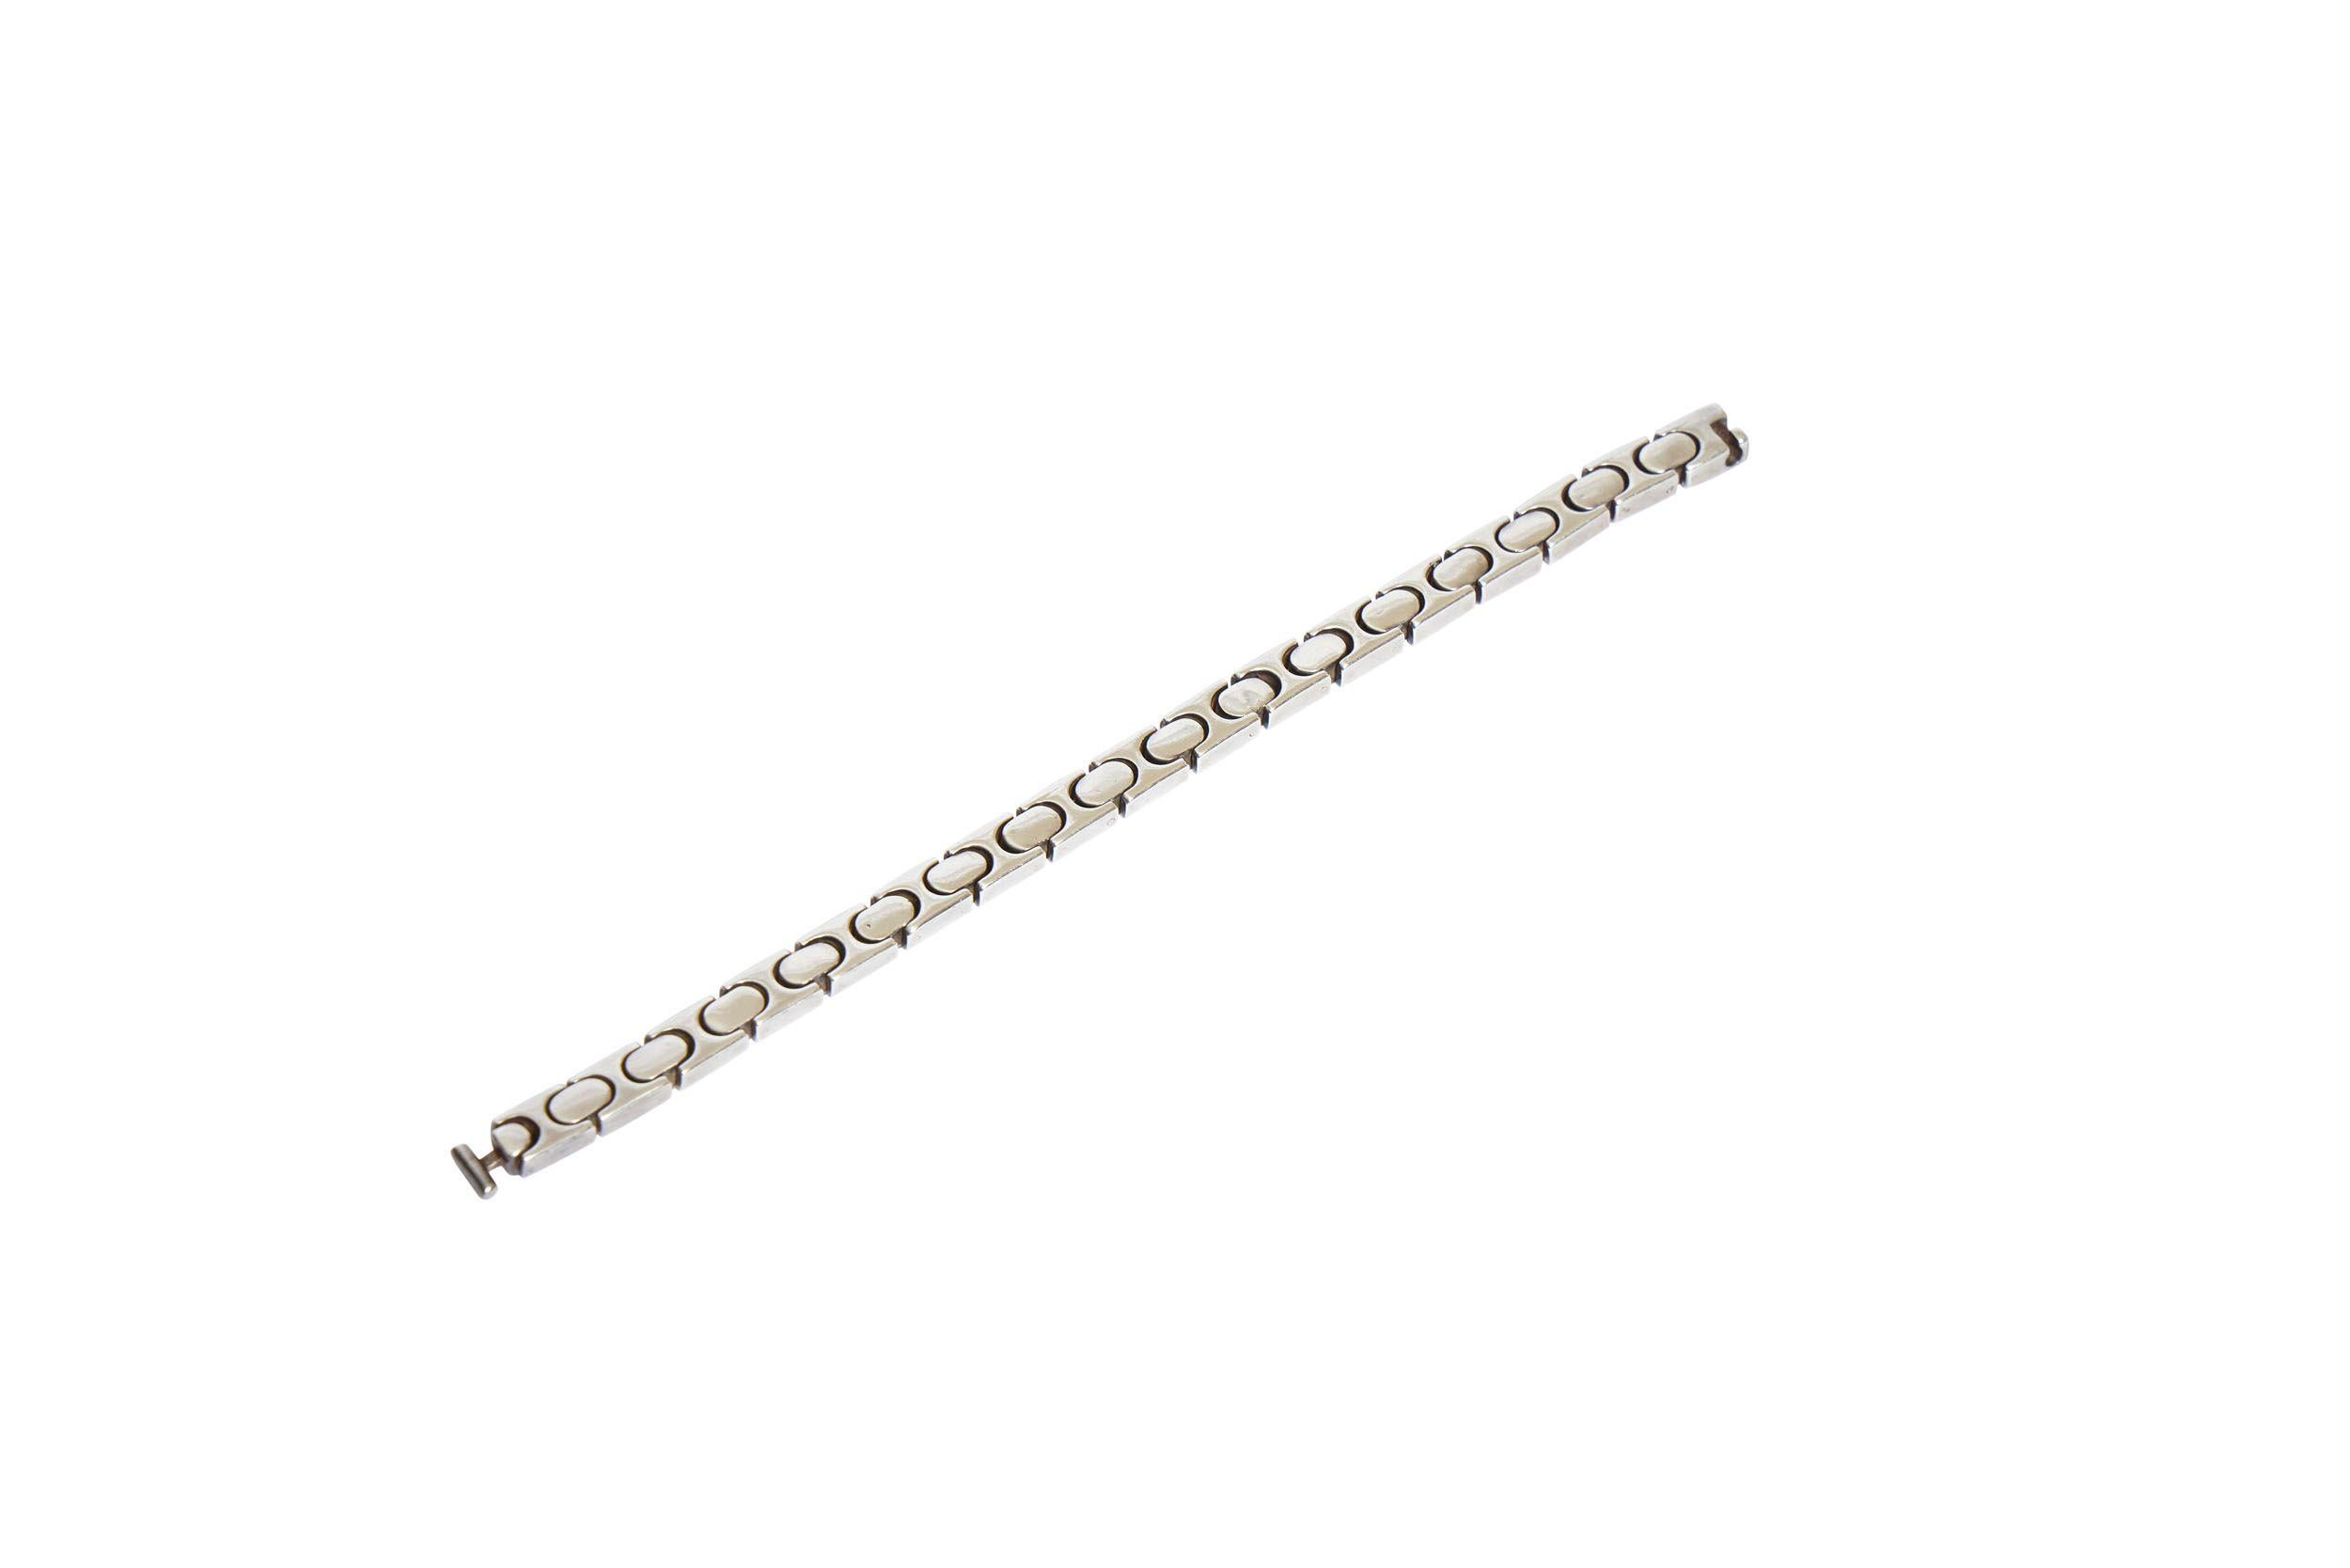 Gucci sterling silver chain link bracelet. Comes with velvet pouch.